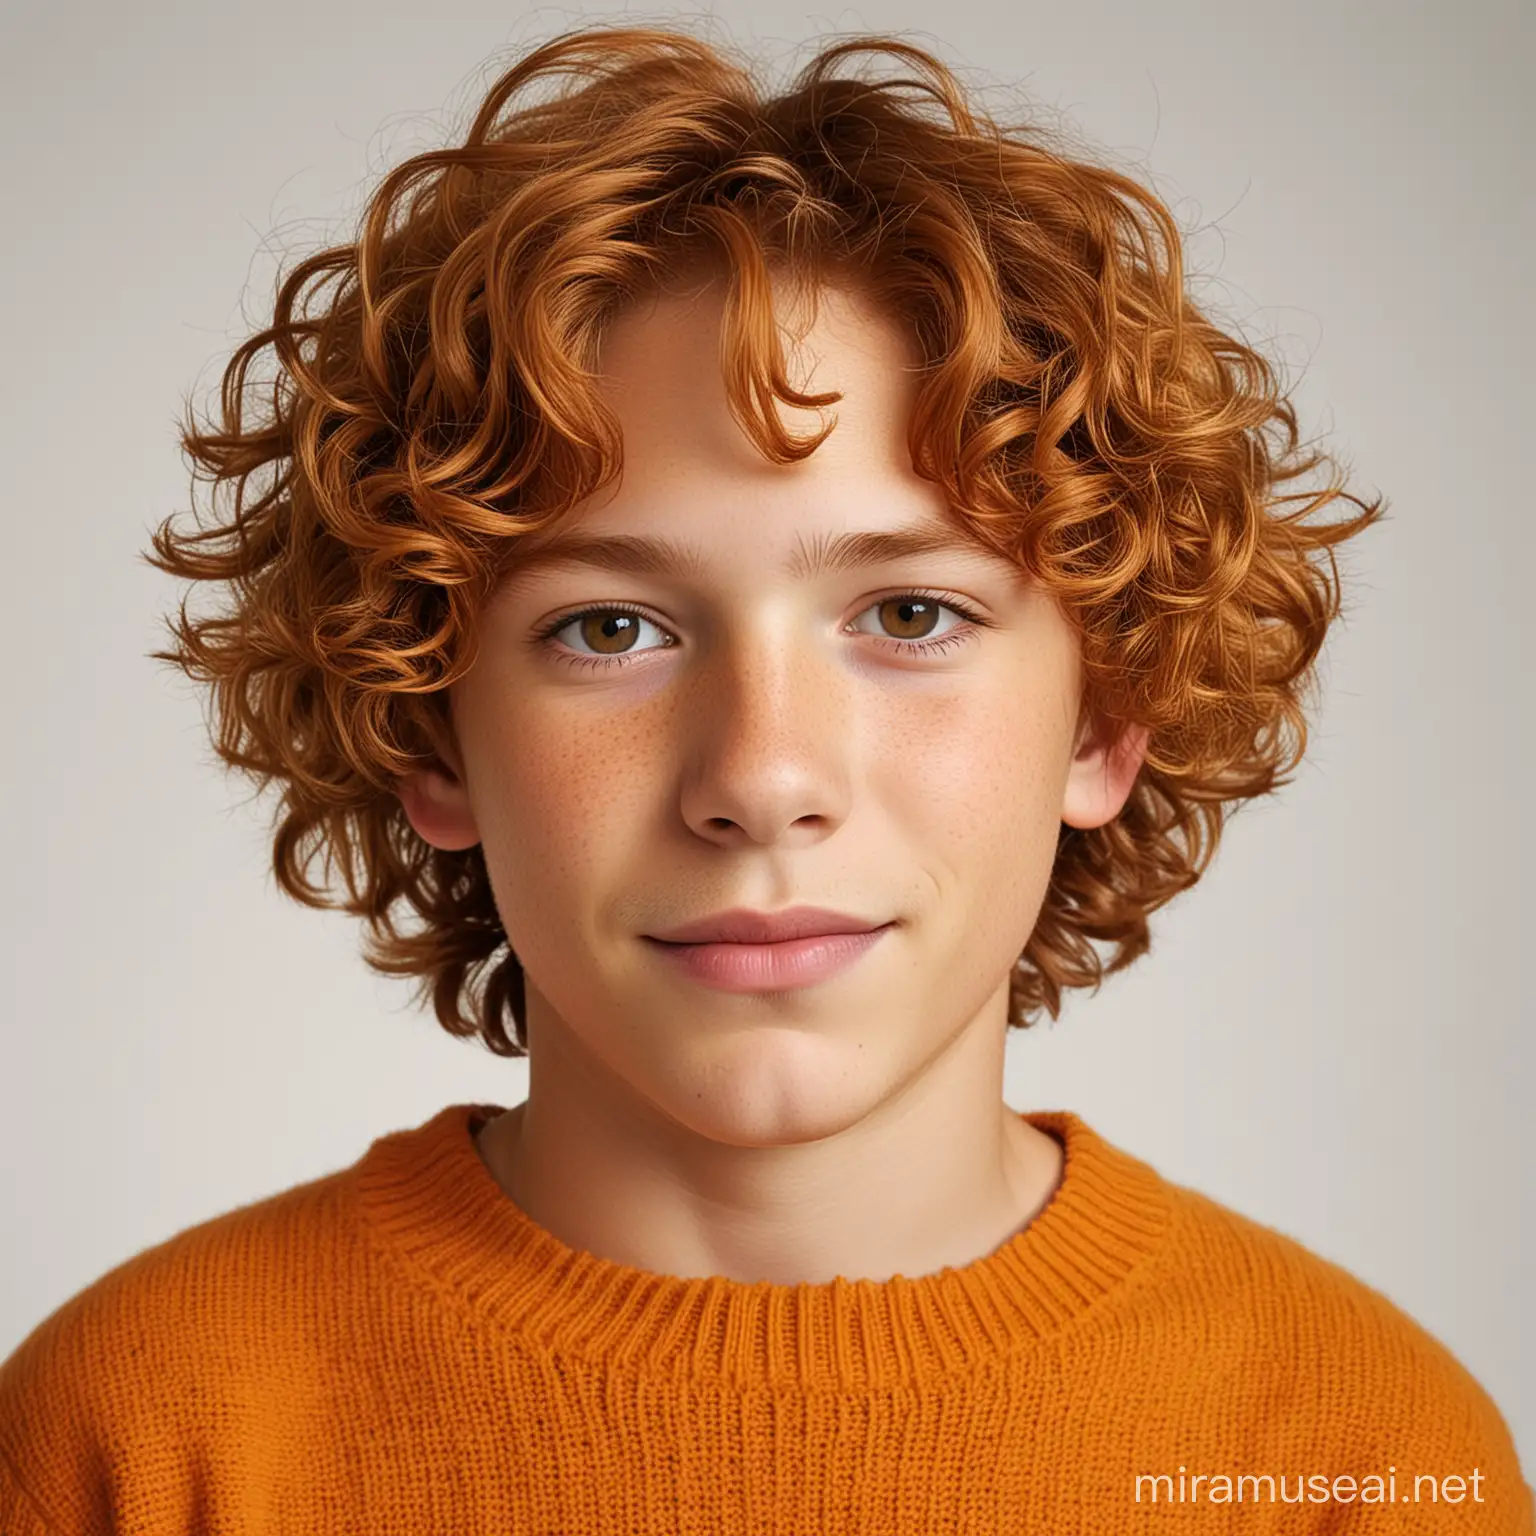 Hawaiian Teenager with Wavy Ginger Hair in Orange Sweater on White Background